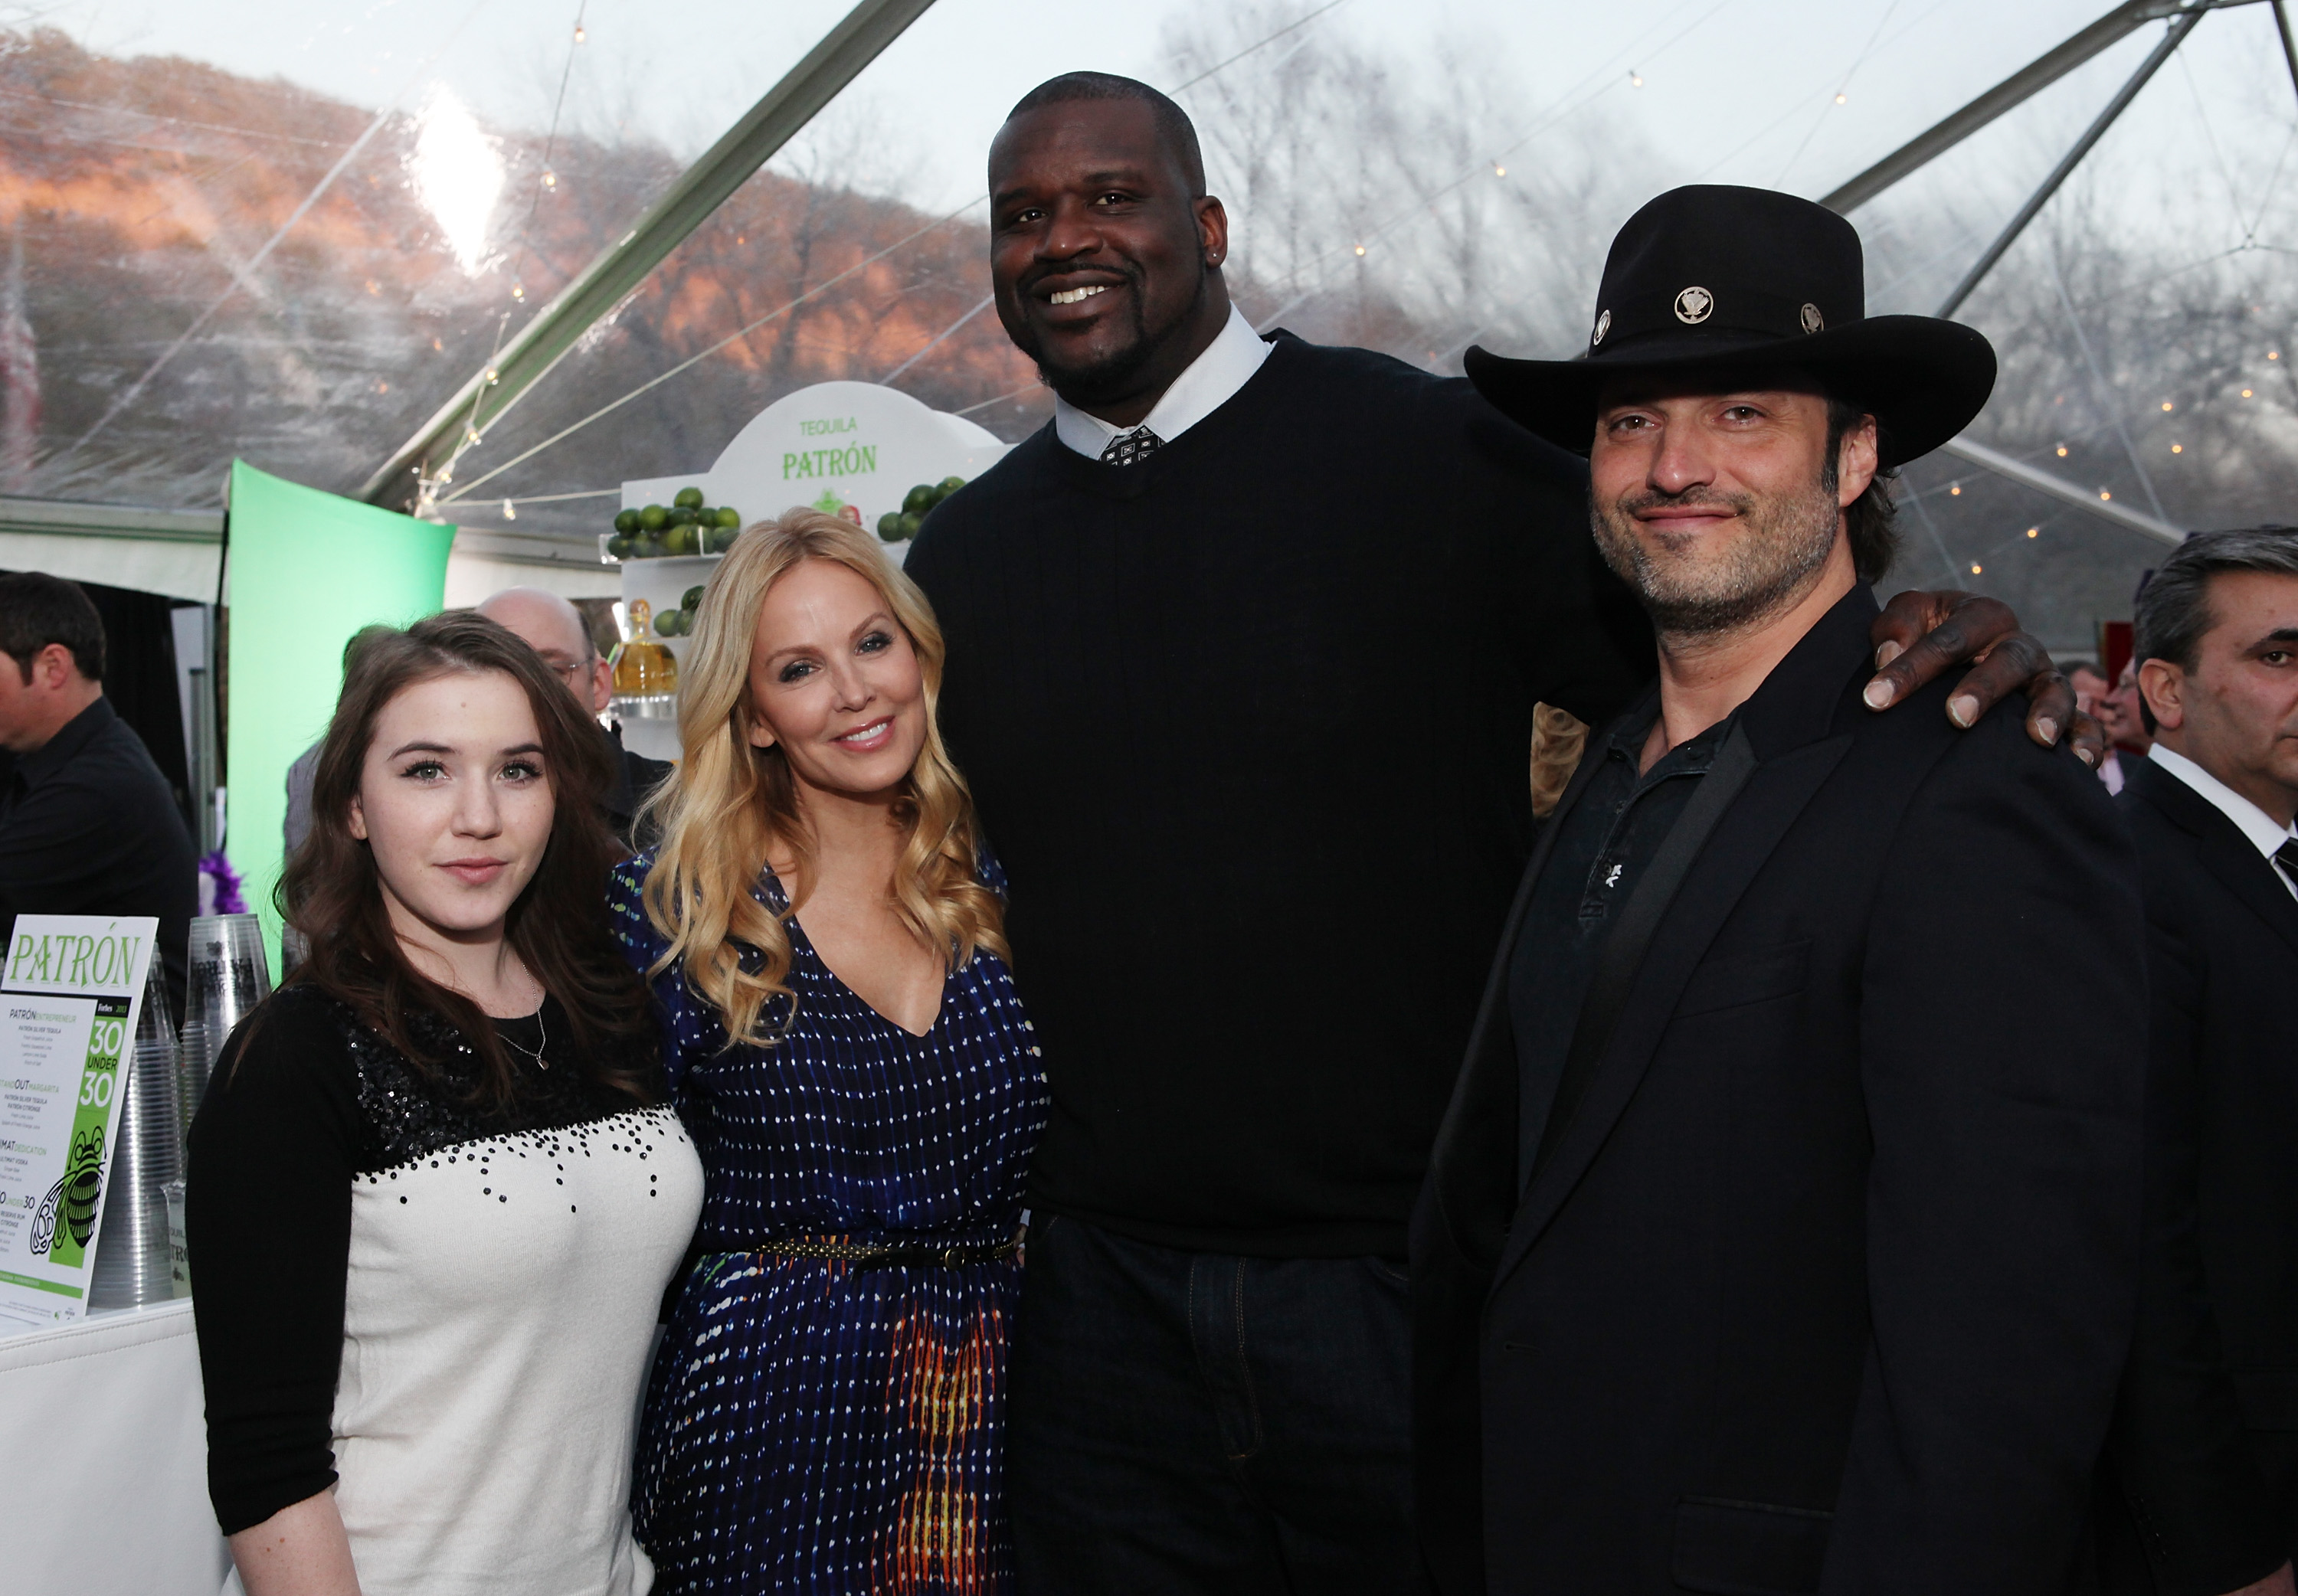 AUSTIN, TX - MARCH 11:  (L-R) Marci Madison, Eloise DeJoria, Shaquille O'Neal and Robert Rodriguez attend Forbes' "30 Under 30" SXSW Private Party on March 11, 2013 in Austin, Texas.  (Photo by Roger Kisby/WireImage)